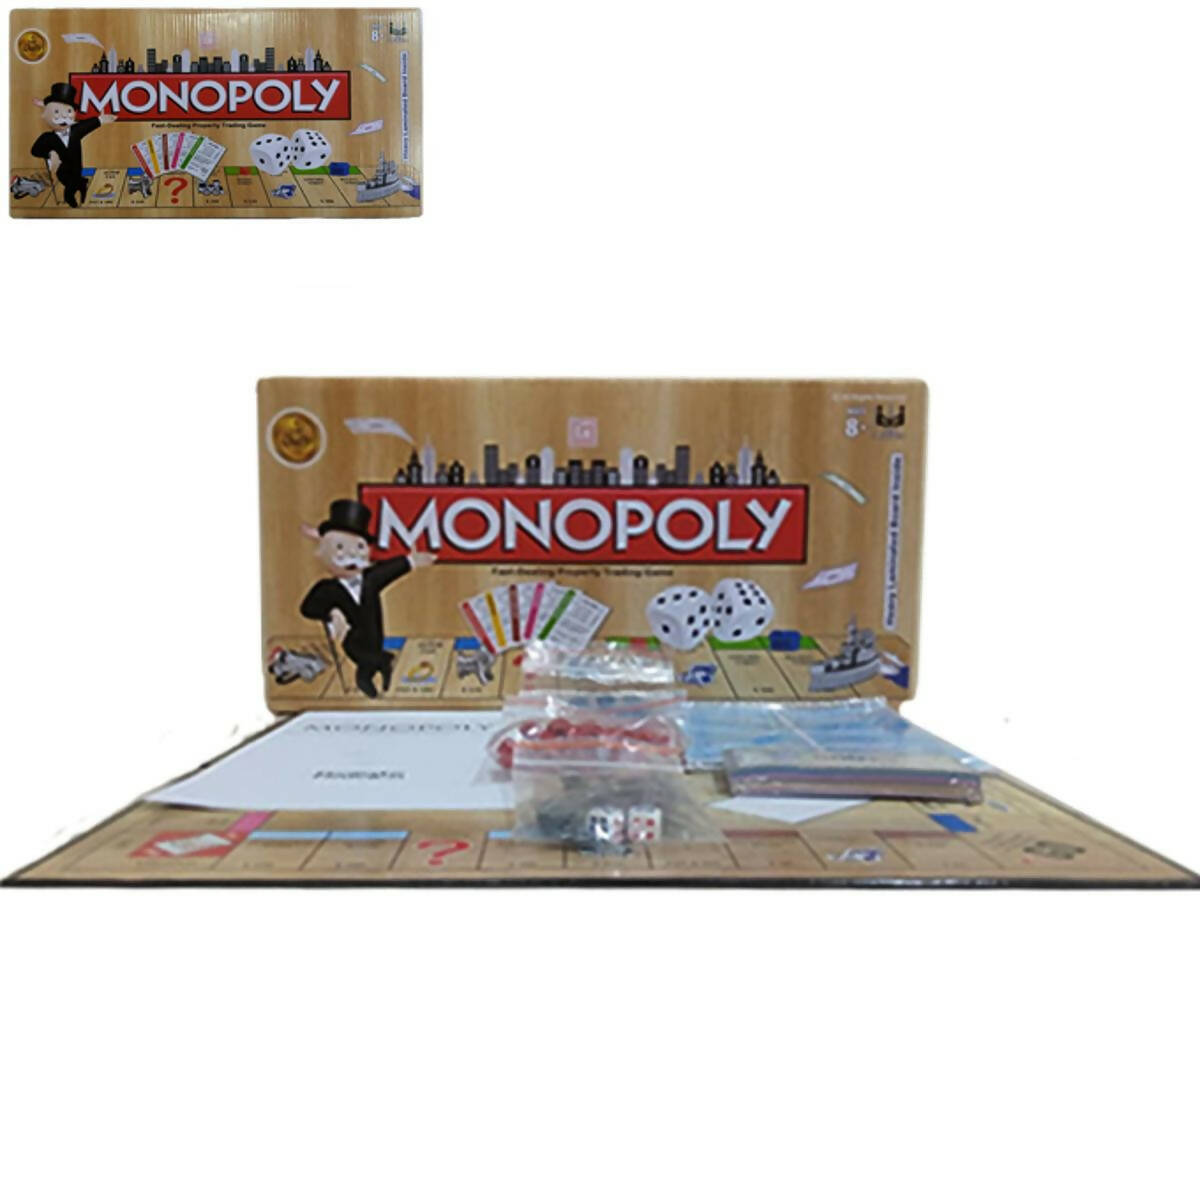 Monopoly Board Game - Local Made Item - 4012